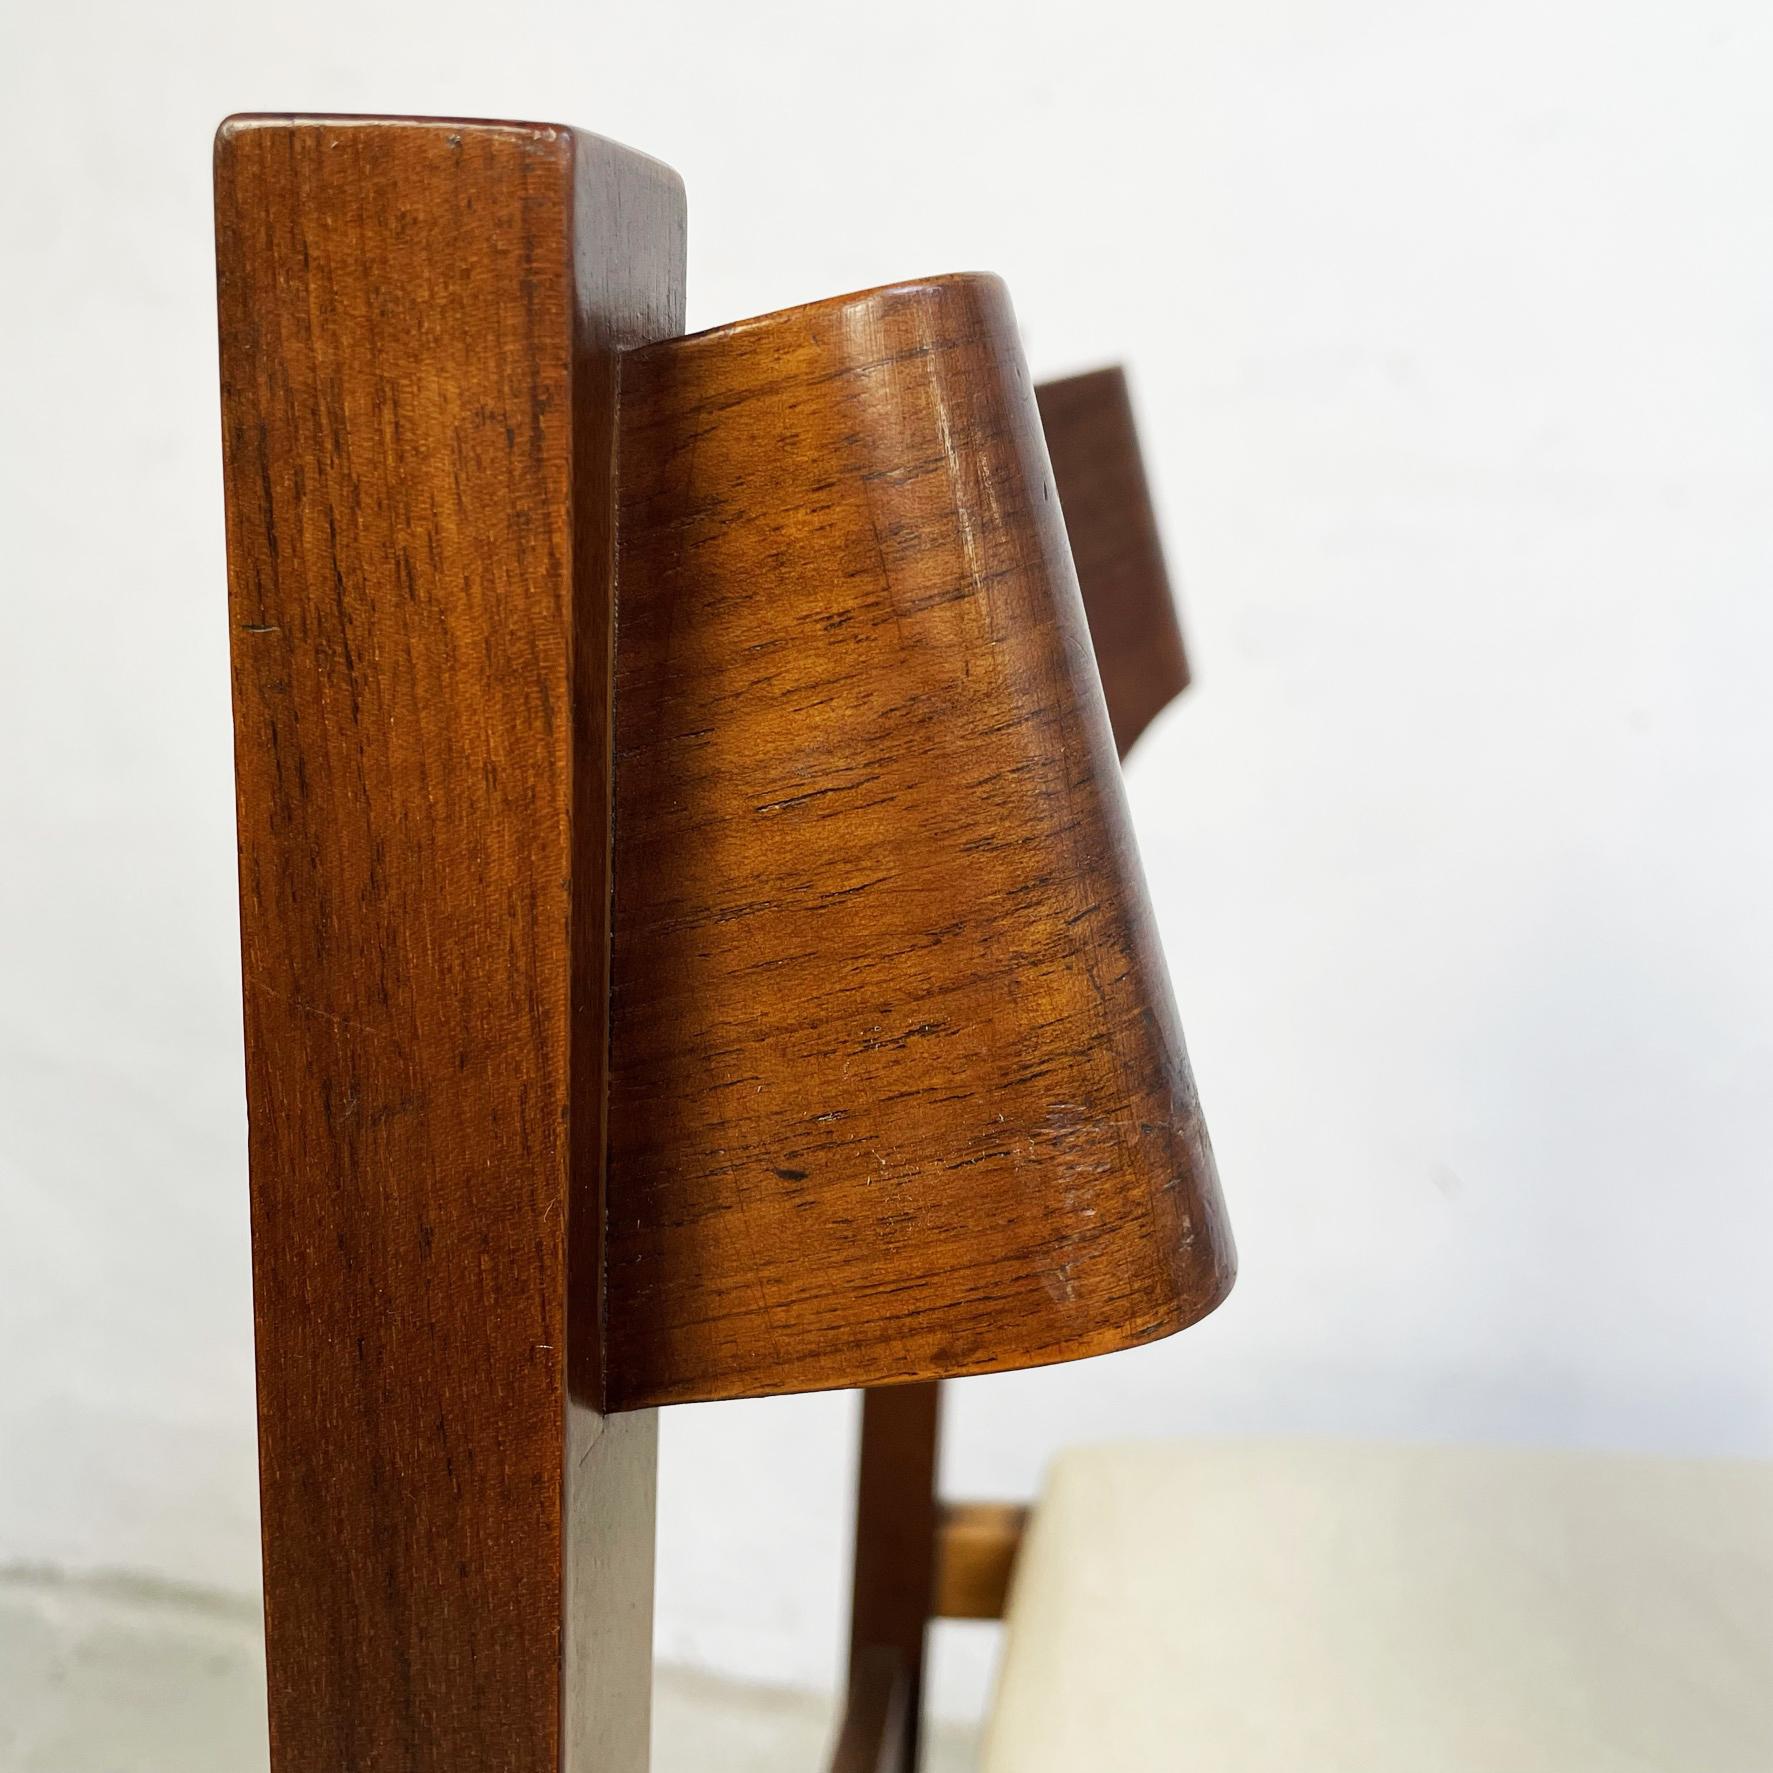 Italian Mid-Century Modern Wooden Chair with Leather Square Seat, 1960s For Sale 7